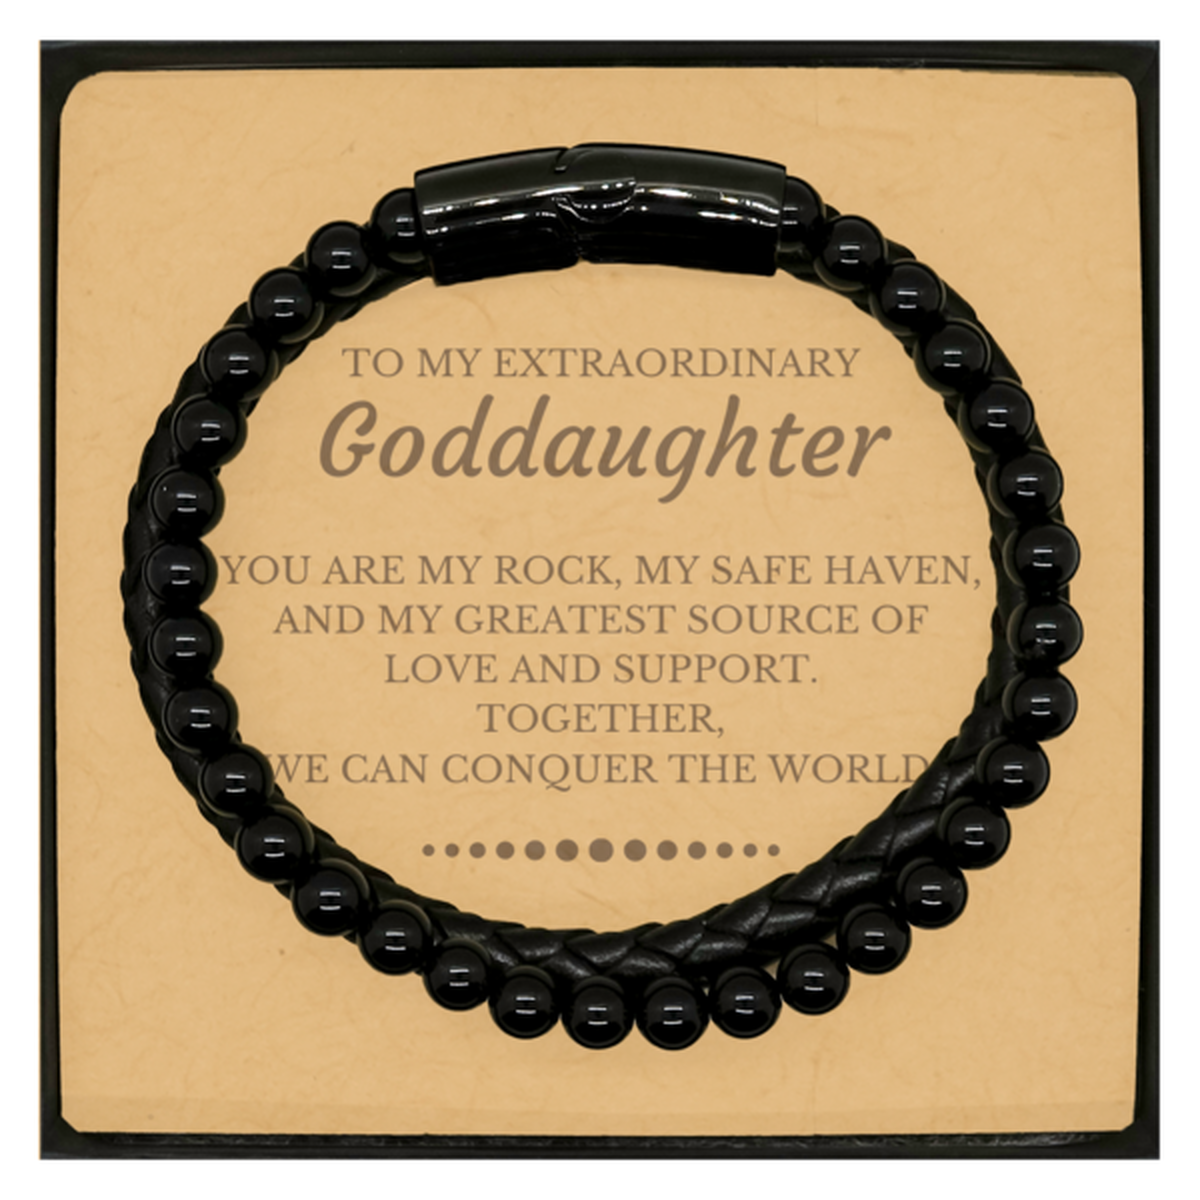 To My Extraordinary Goddaughter Gifts, Together, we can conquer the world, Birthday Christmas Stone Leather Bracelets For Goddaughter, Christmas Gifts For Goddaughter